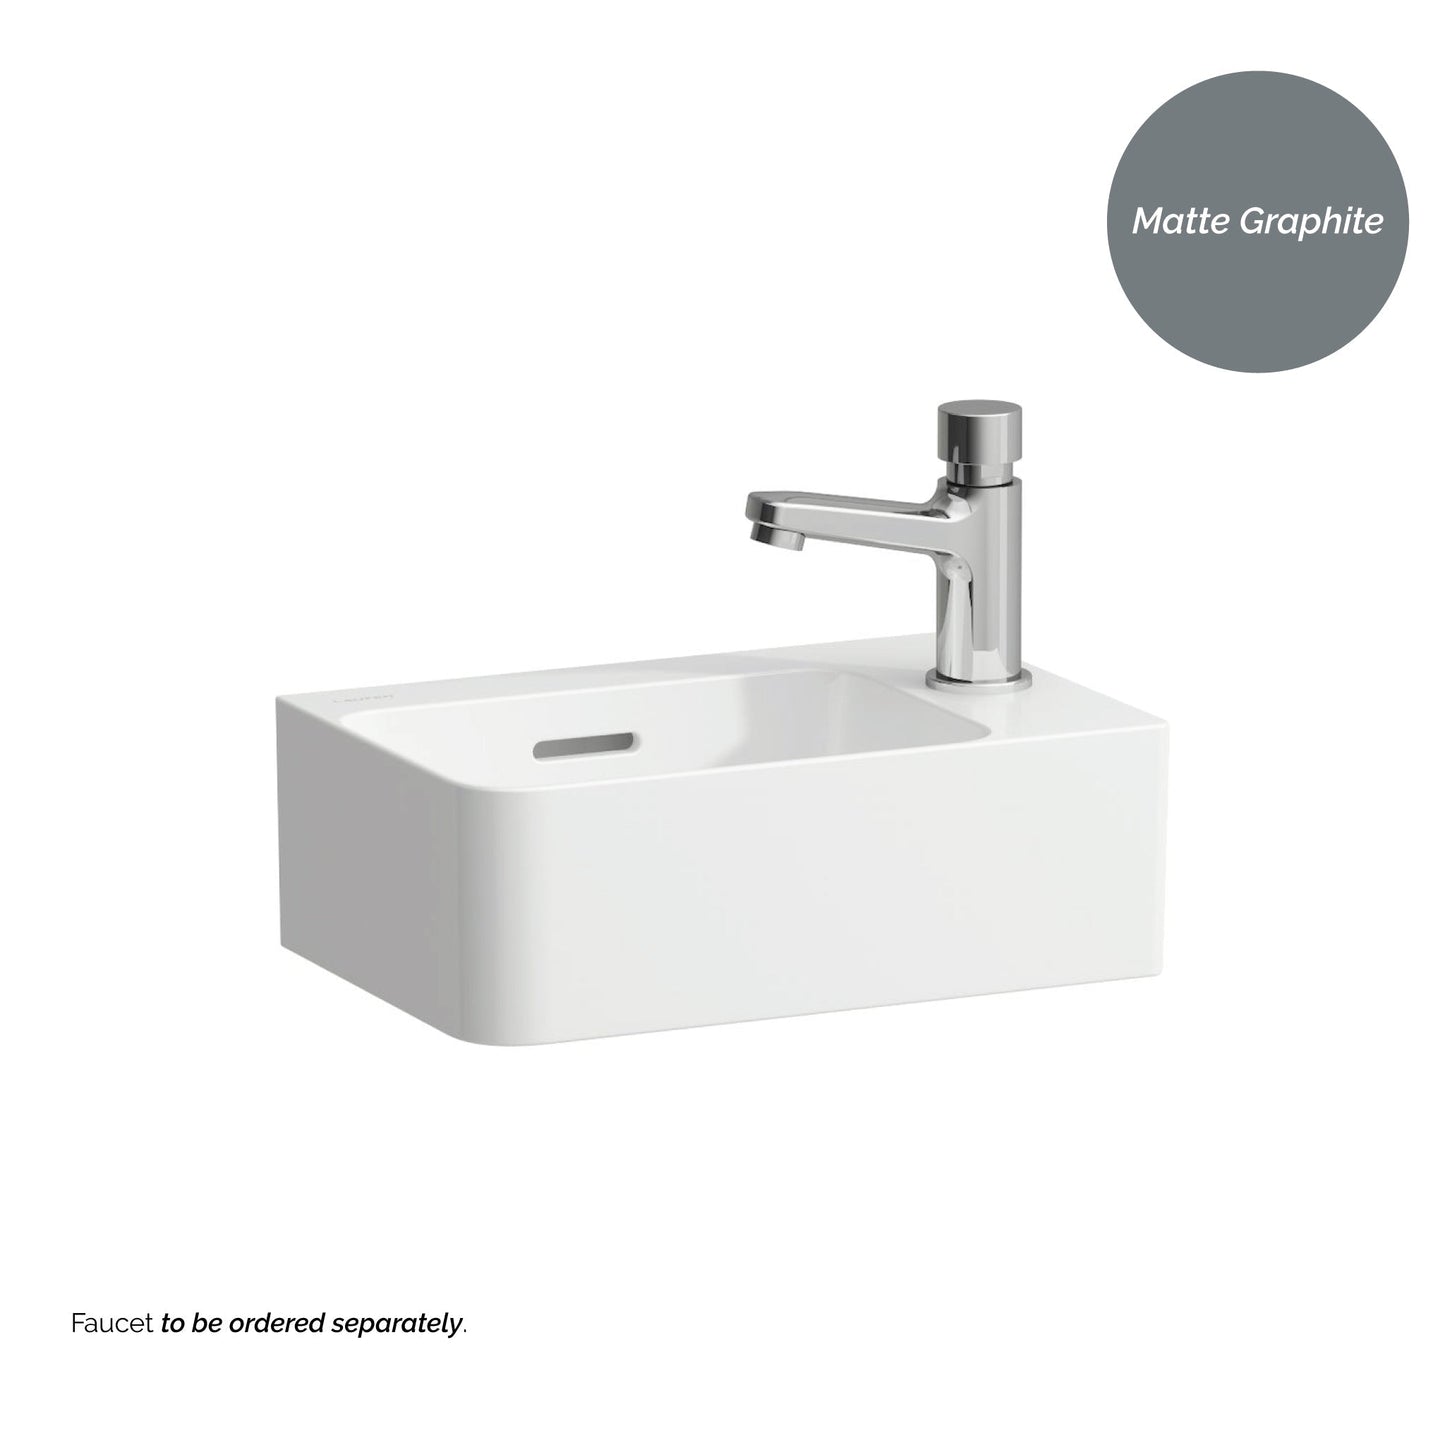 Laufen Val 13" x 9" Matte Graphite Ceramic Wall-Mounted Bathroom Sink With Faucet Hole on the Right